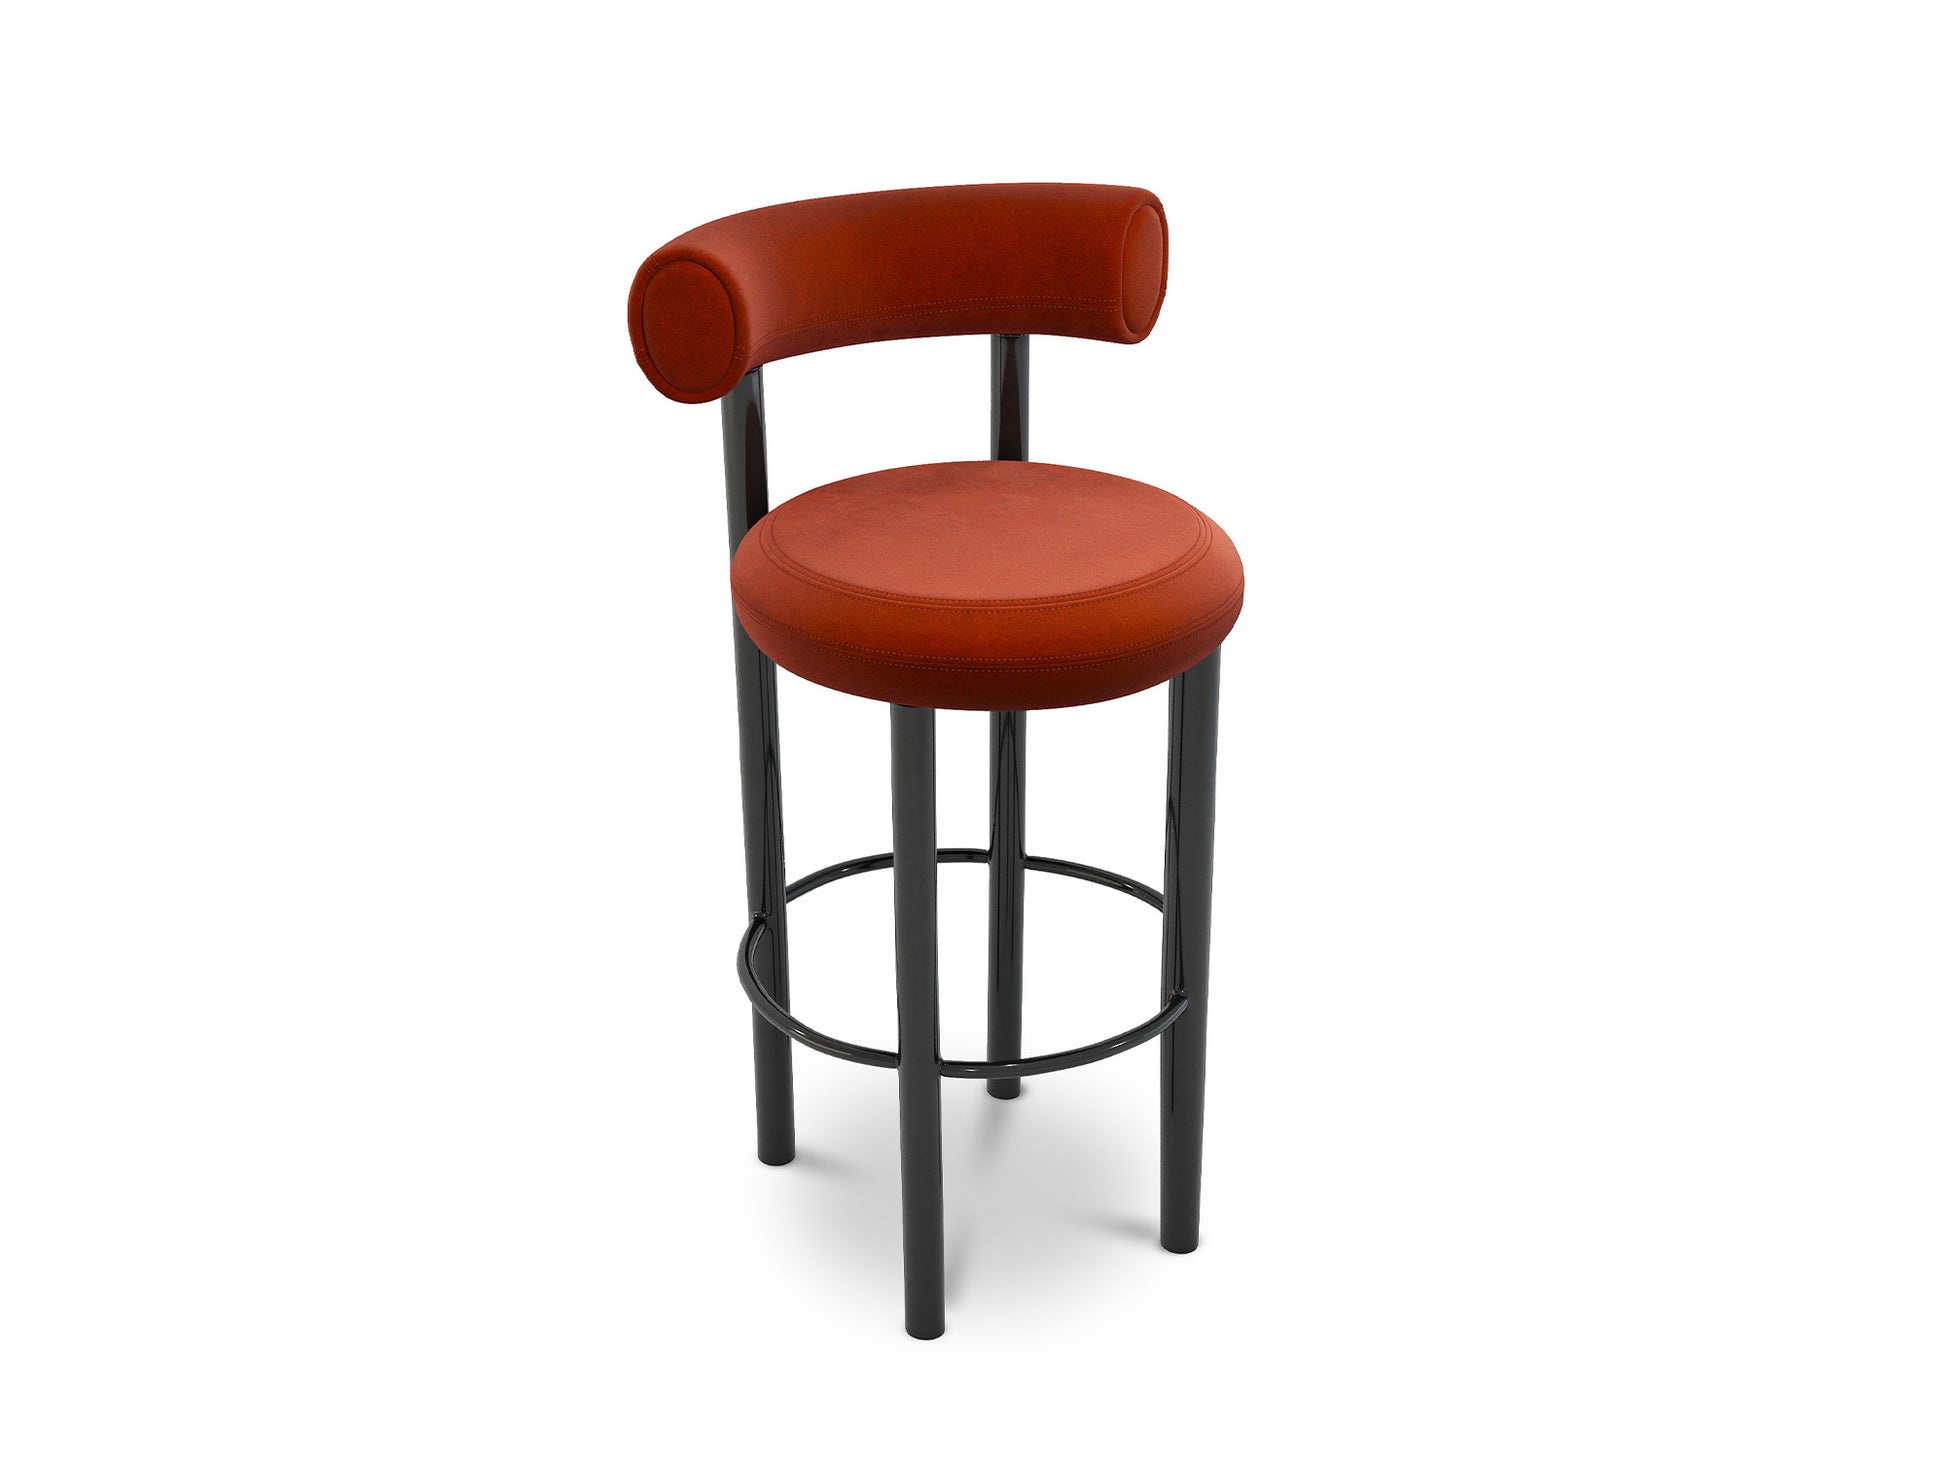 Fat Bar/Counter Stool by Tom Dixon - Gentle 2 373